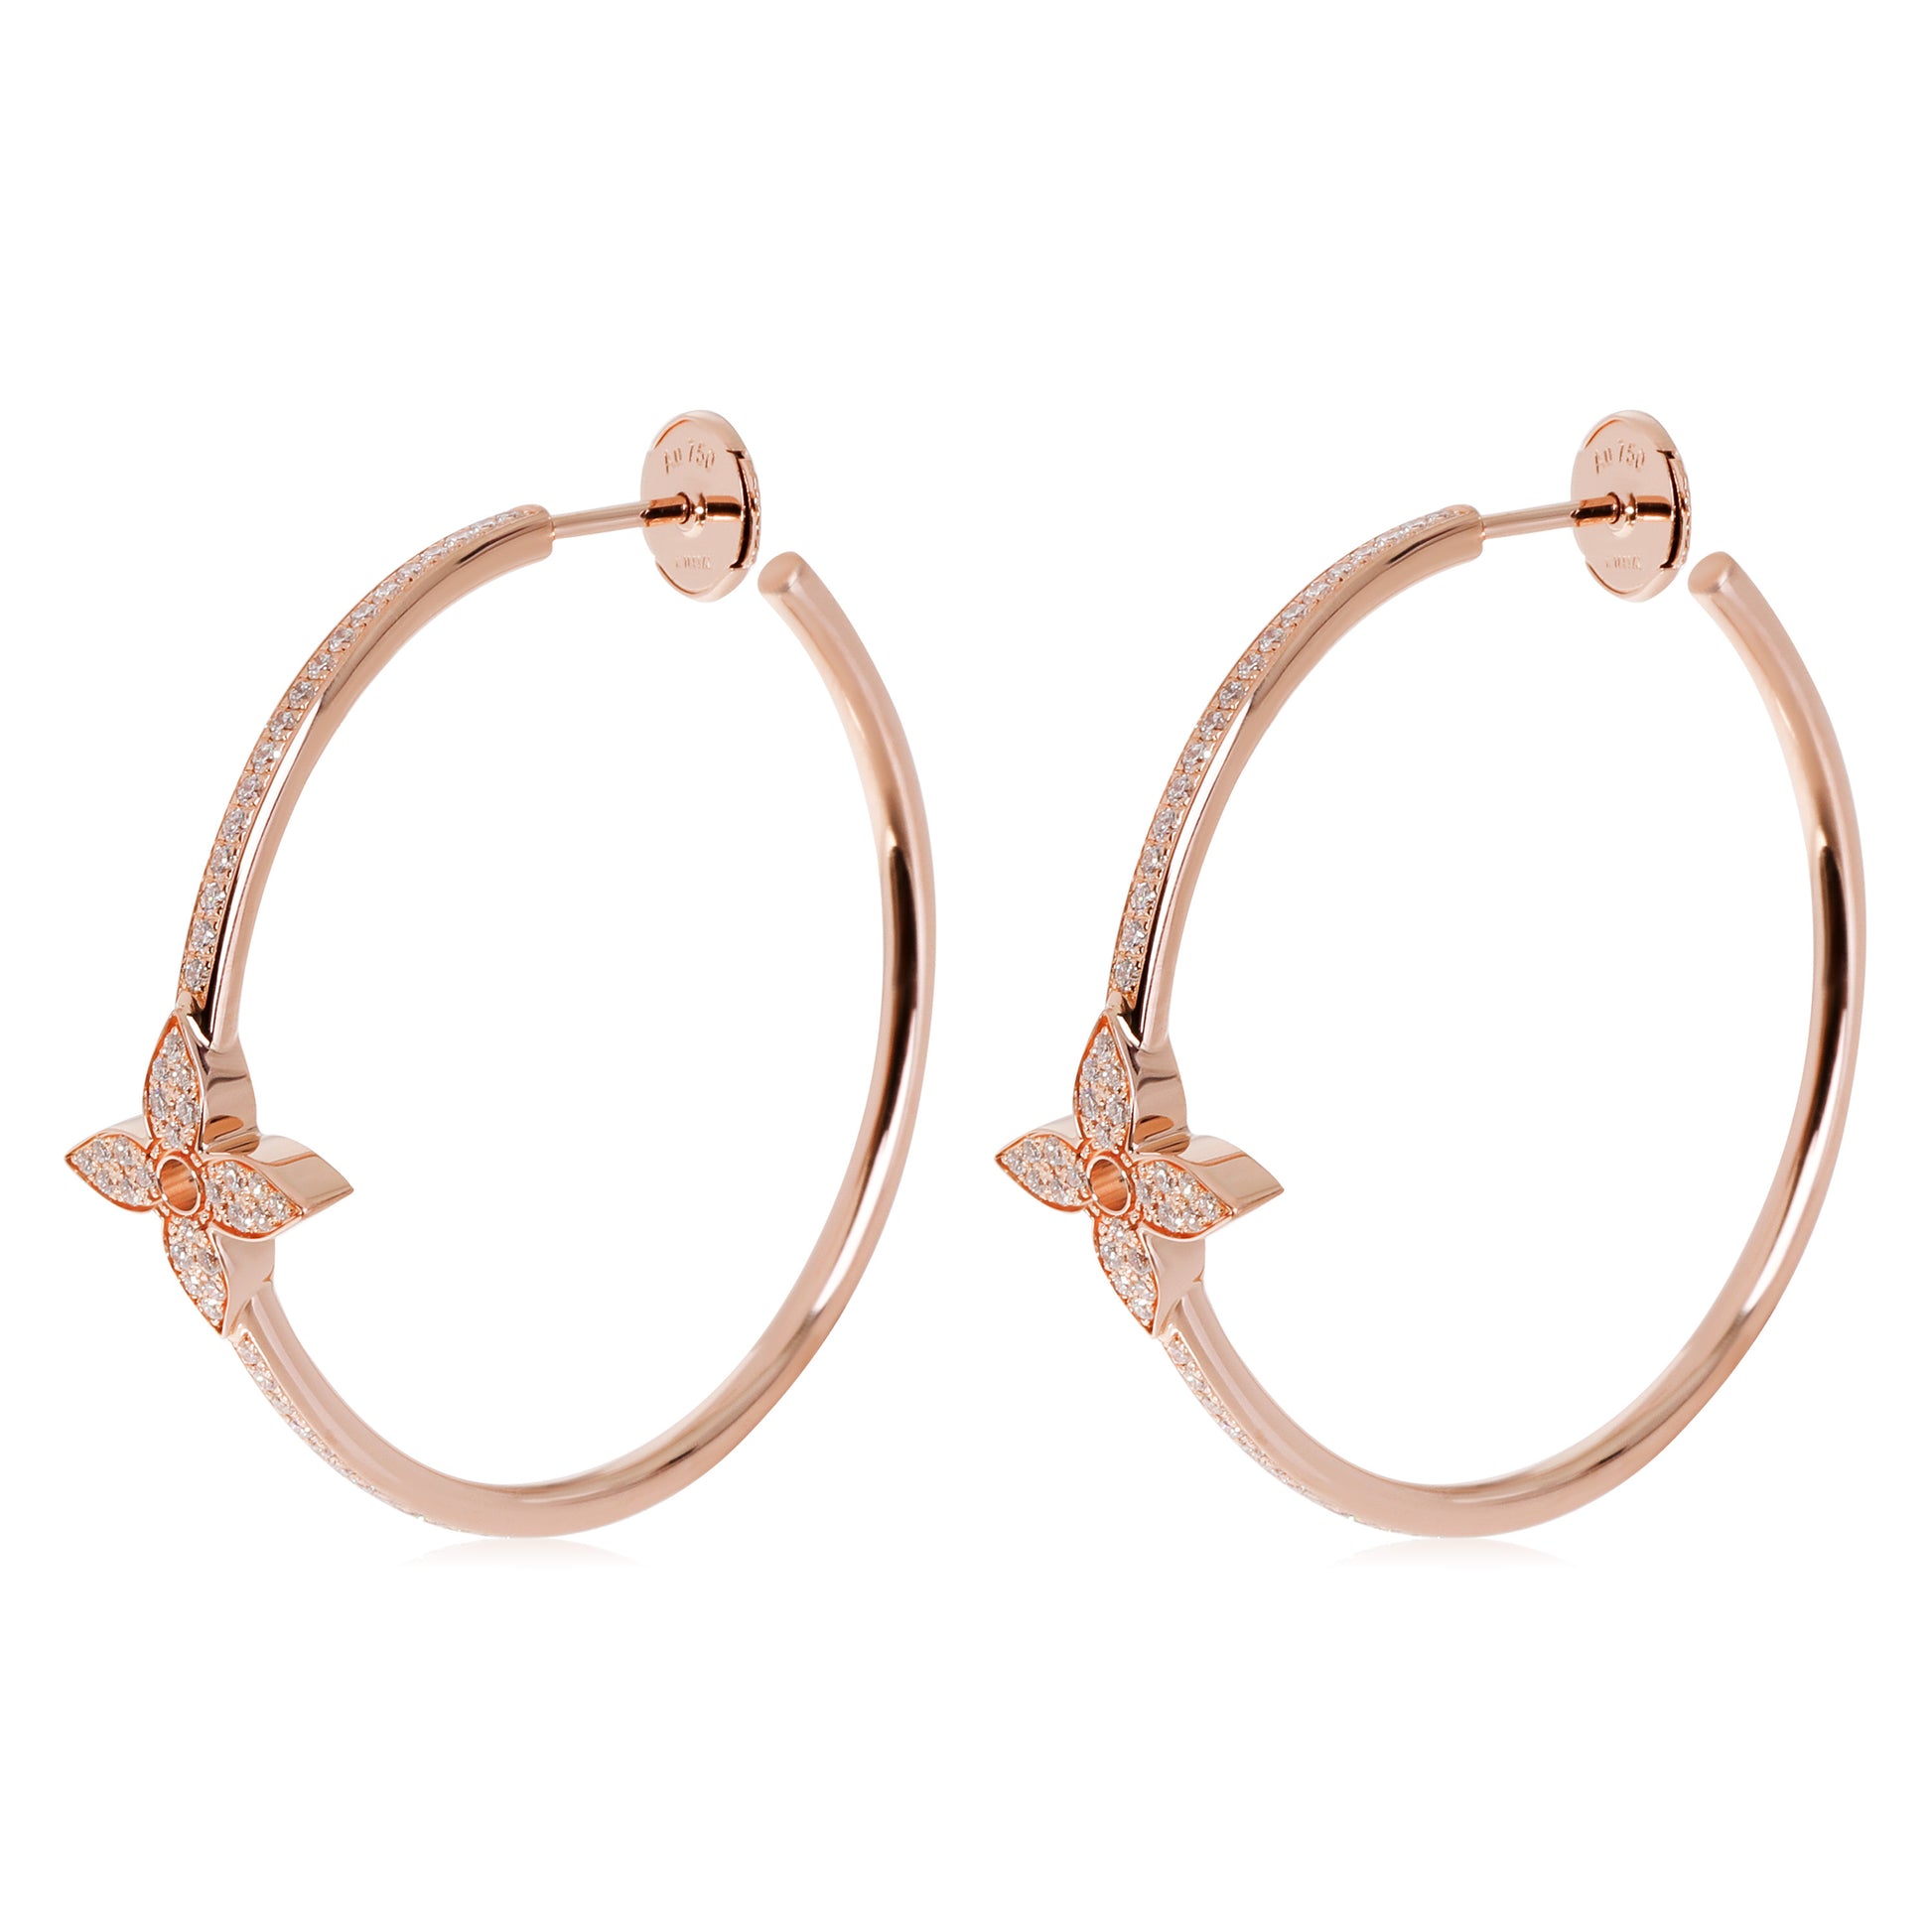 Idylle Blossom Small Hoop, Pink Gold And Diamond - Per Unit